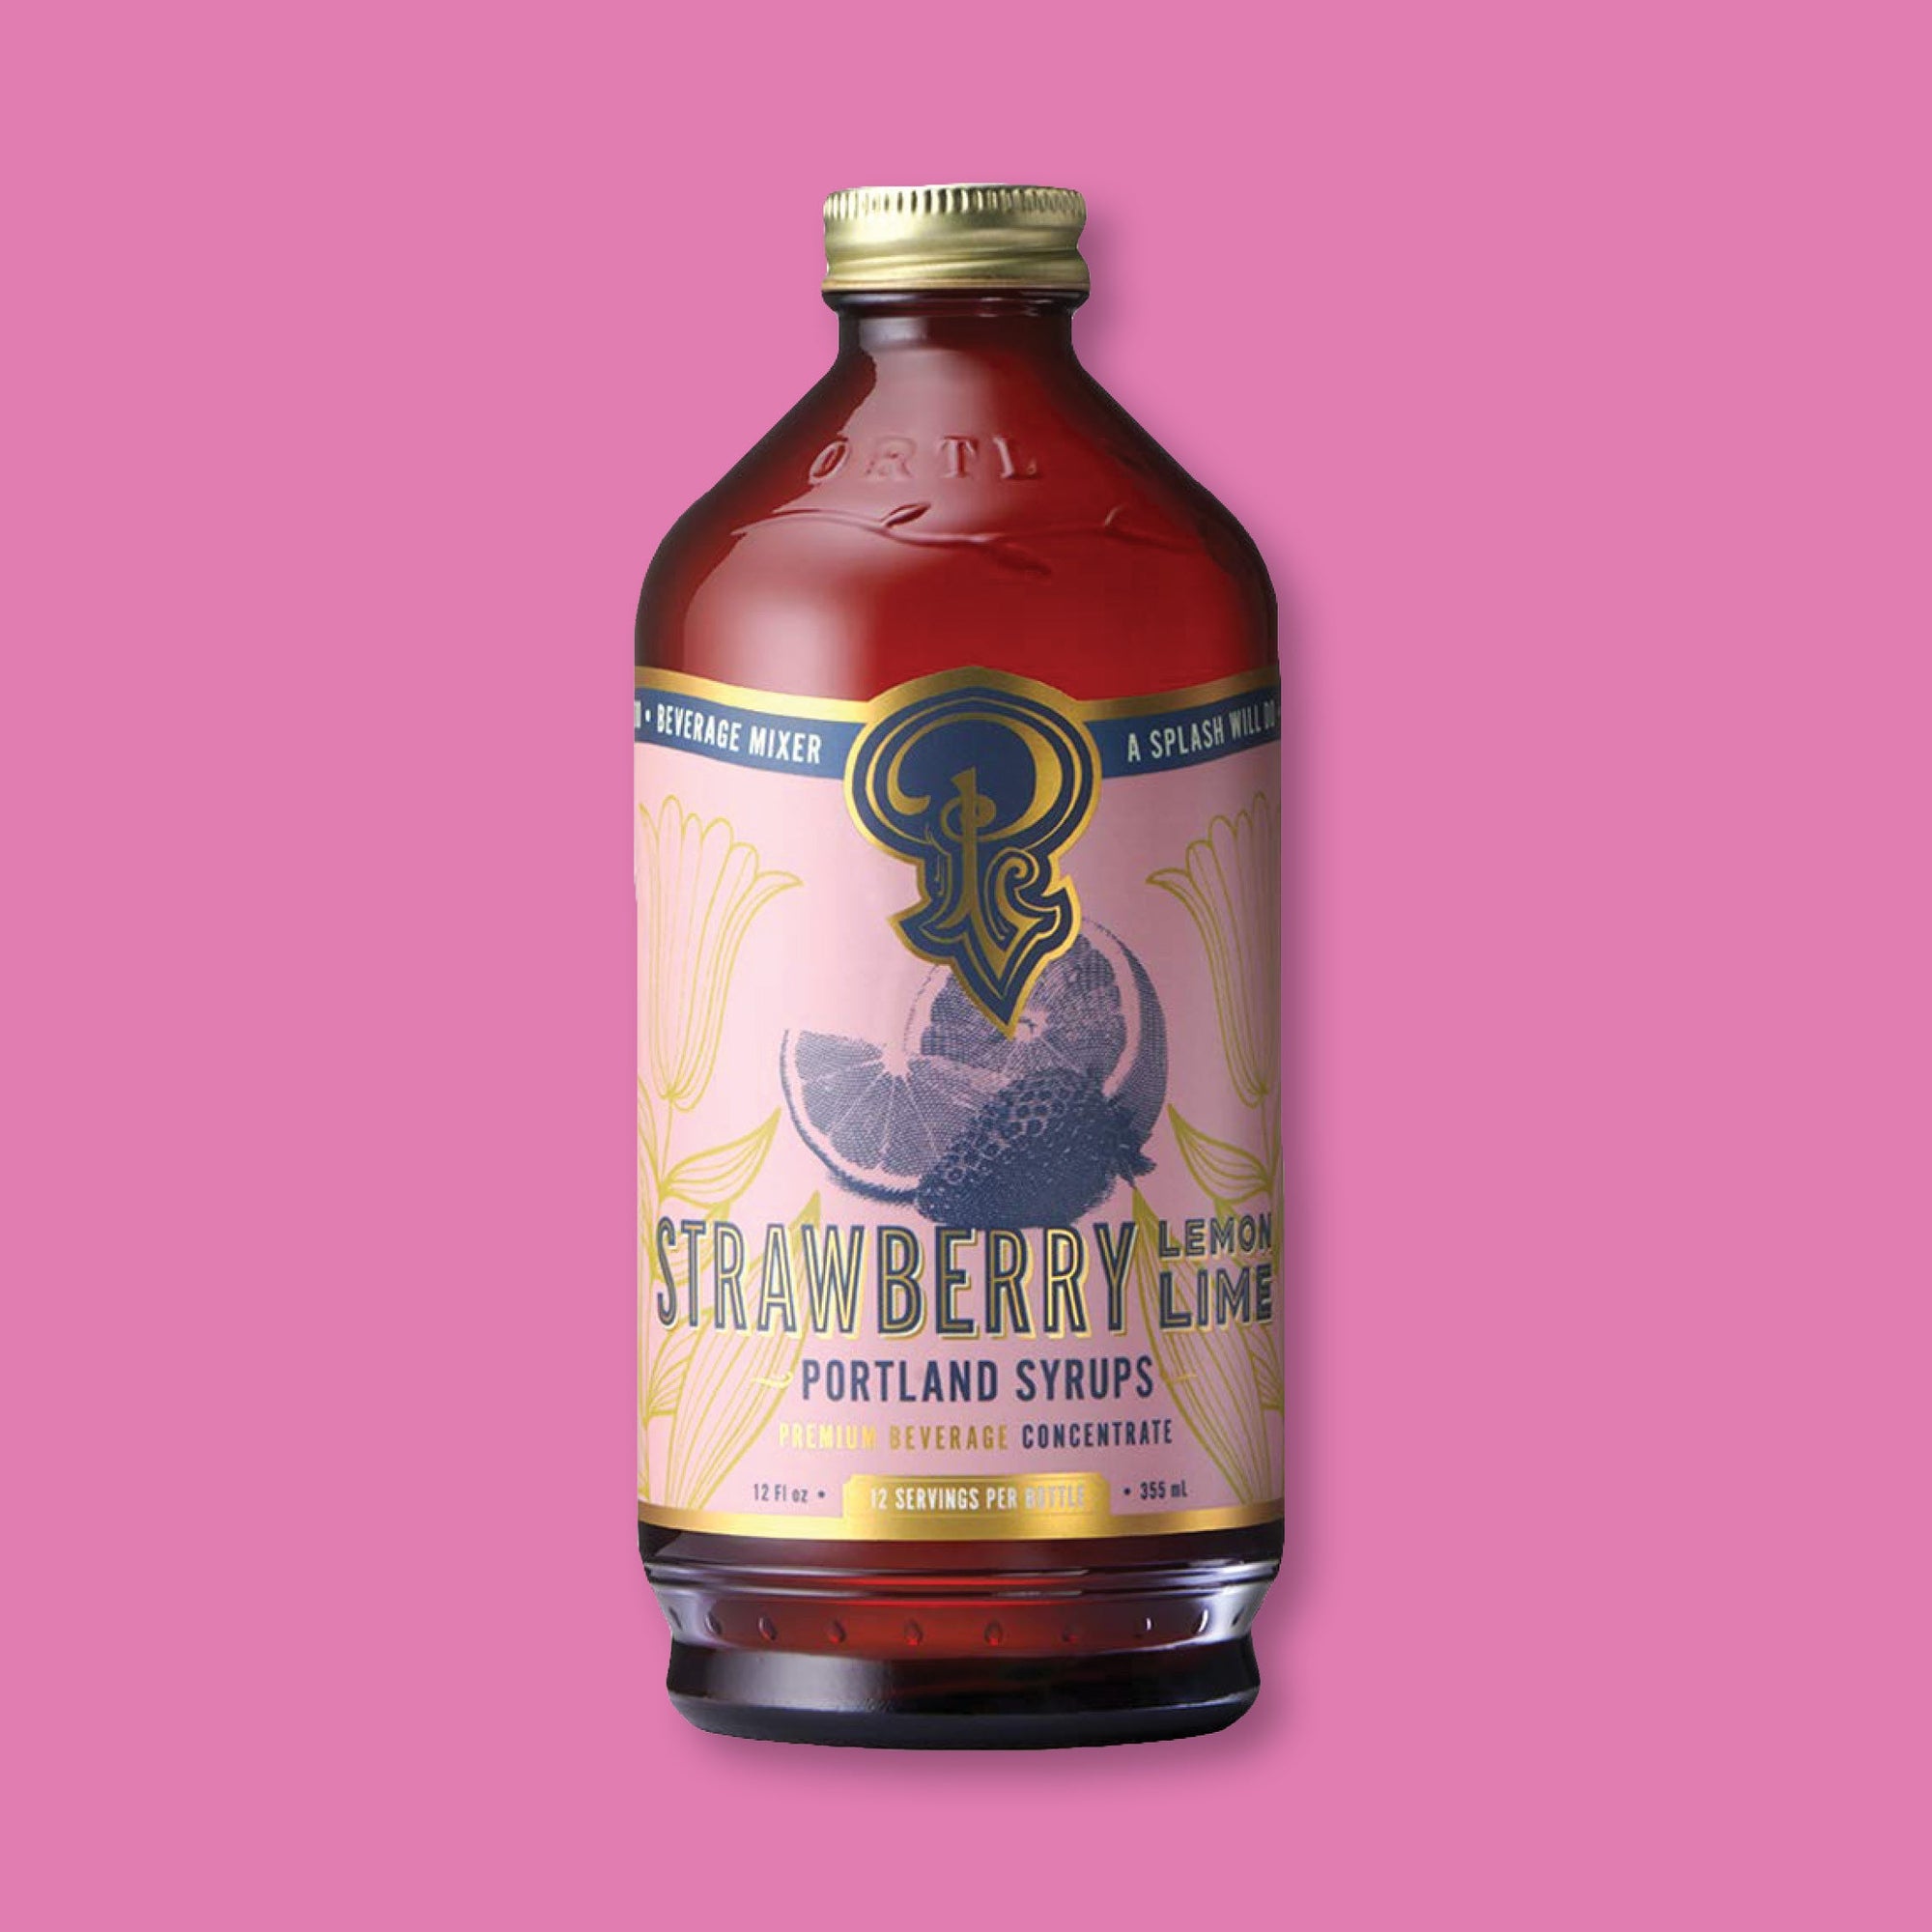 On a raspberry pink background sits a brown bottle. This glass bottle has a gold lid and a colorful label on the front. There is an illustration of a strawberry, a lime wedge, and a cut lemon. It says in purple "PORTLAND SYRUPS" in all caps font. It also says "STRAWBERRY LEMON LIME" in purple and gold, all caps block font. Under that says "PREMIUM BEVERAGE CONCENTRATE" in gold, all caps block font. 12 servings per bottle. 12 Fl oz 355 mL